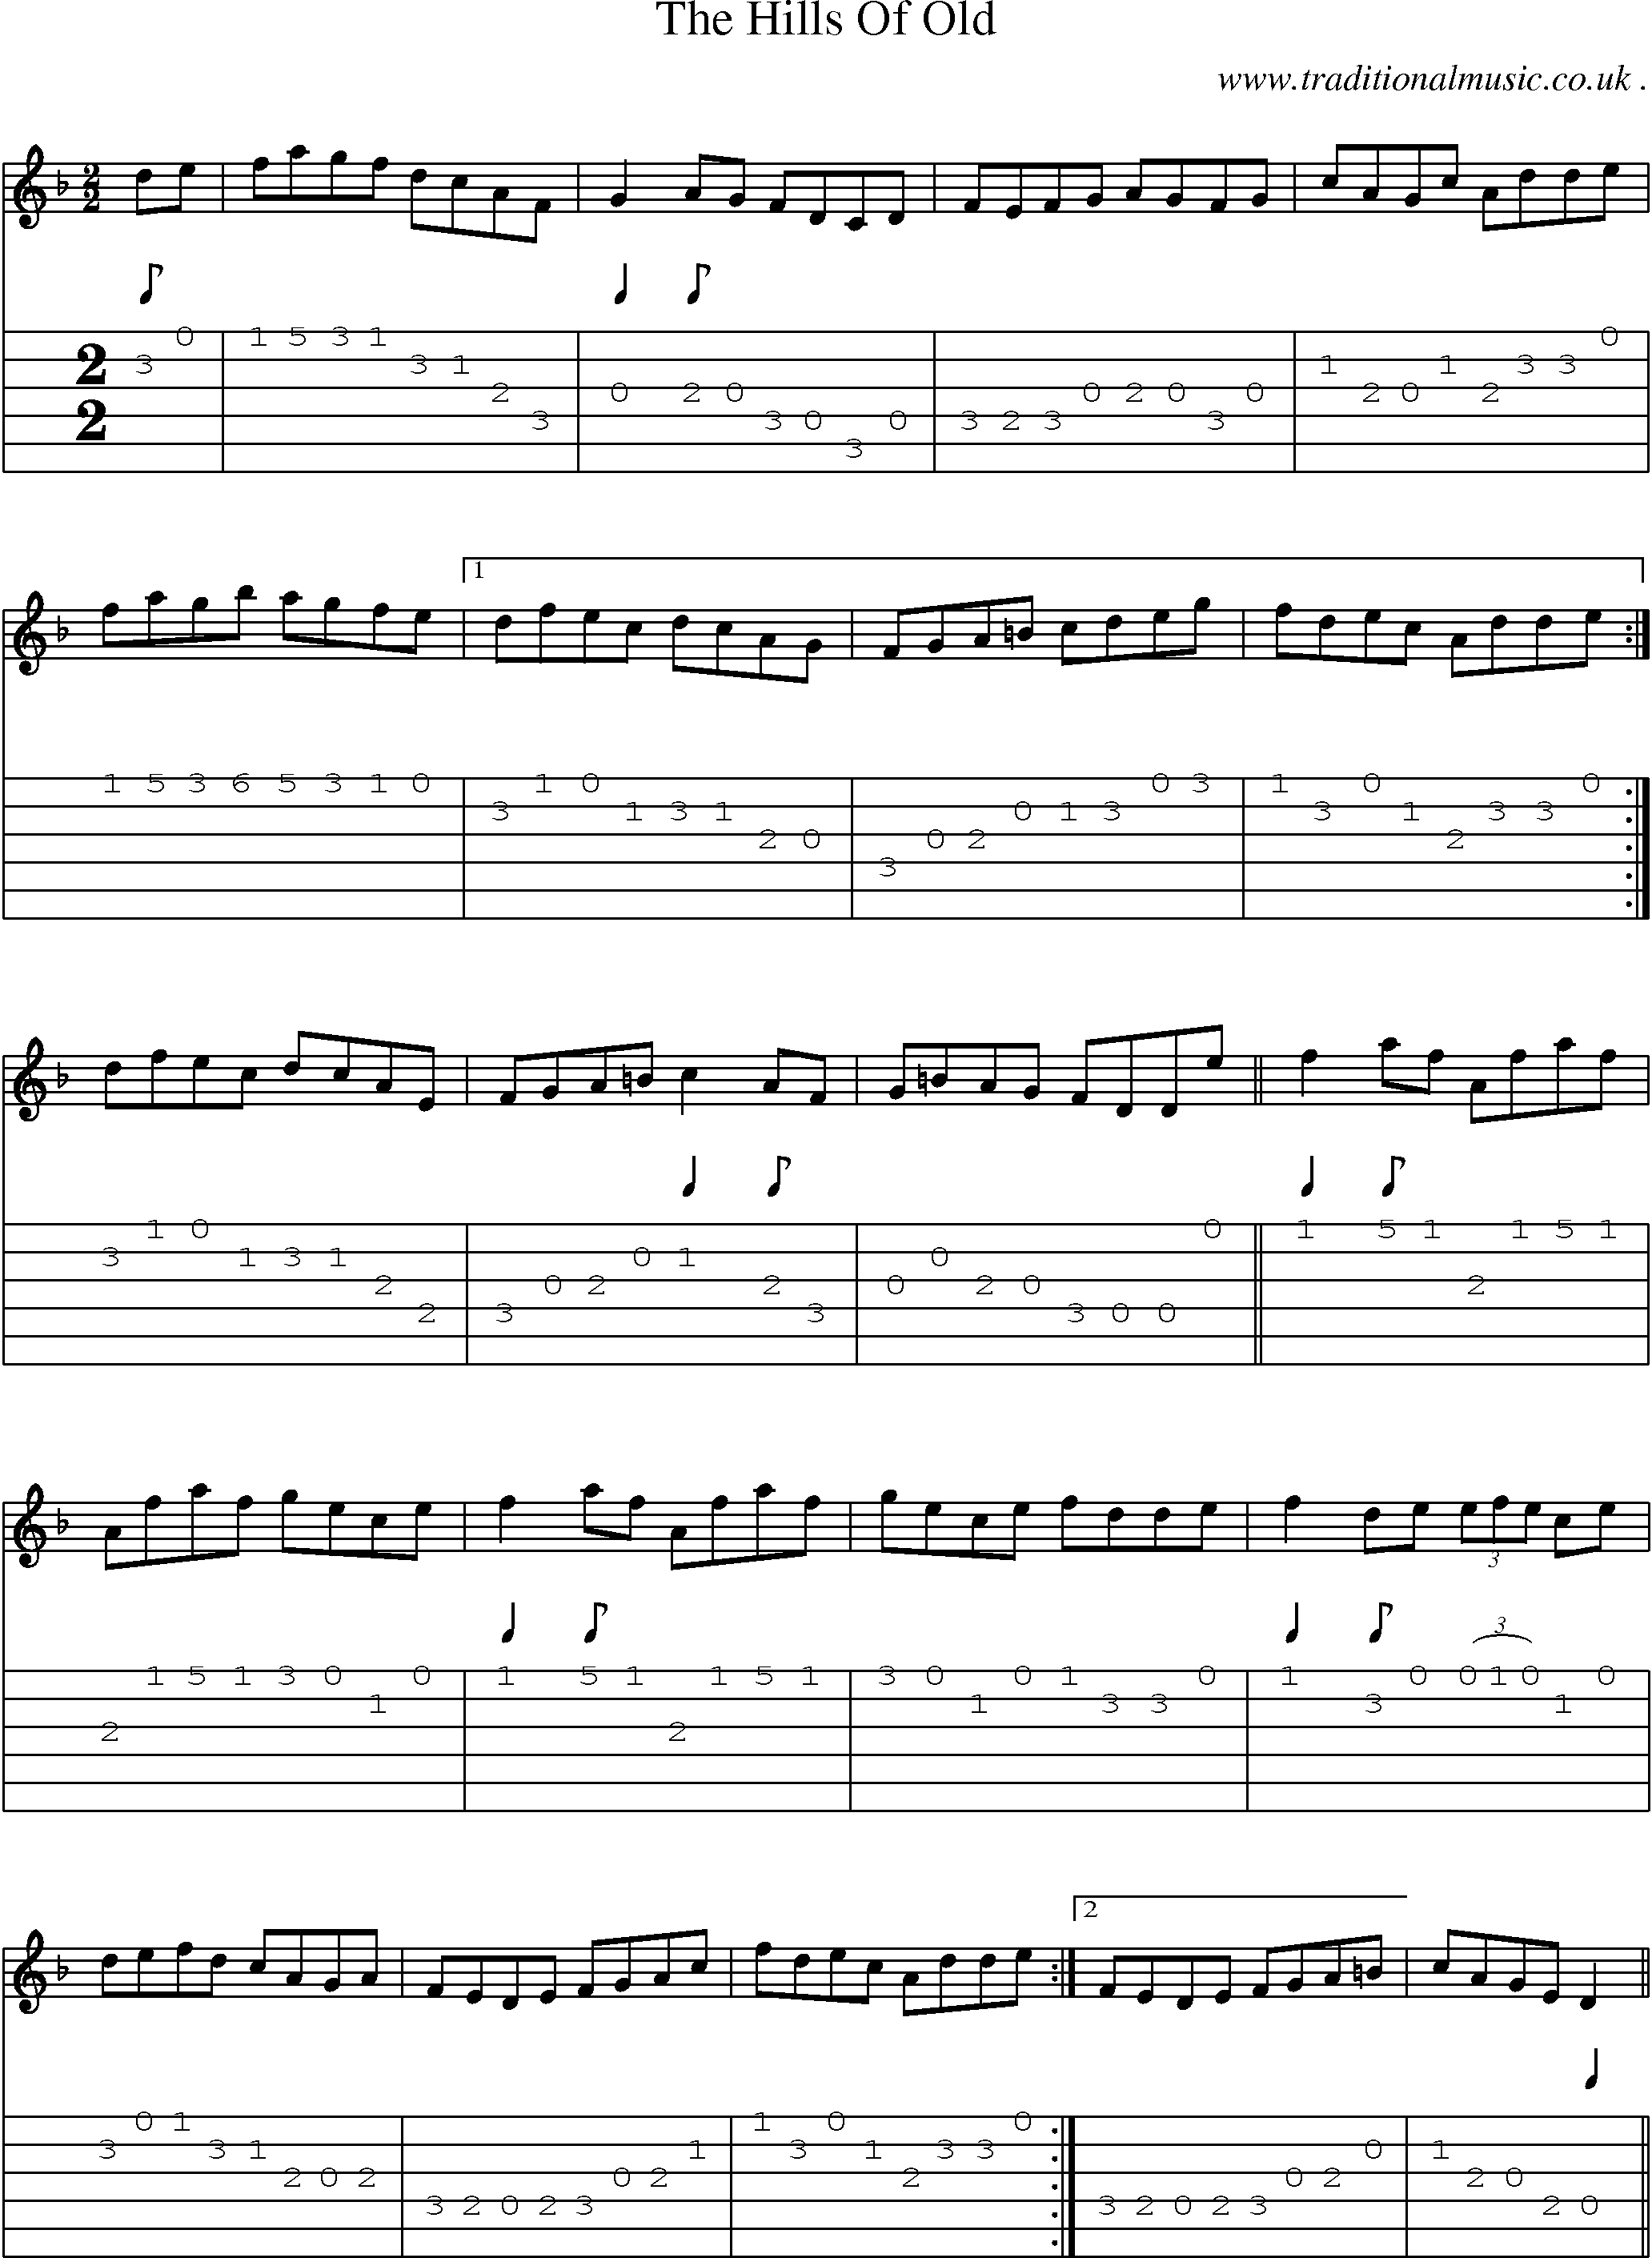 Sheet-Music and Guitar Tabs for The Hills Of Old